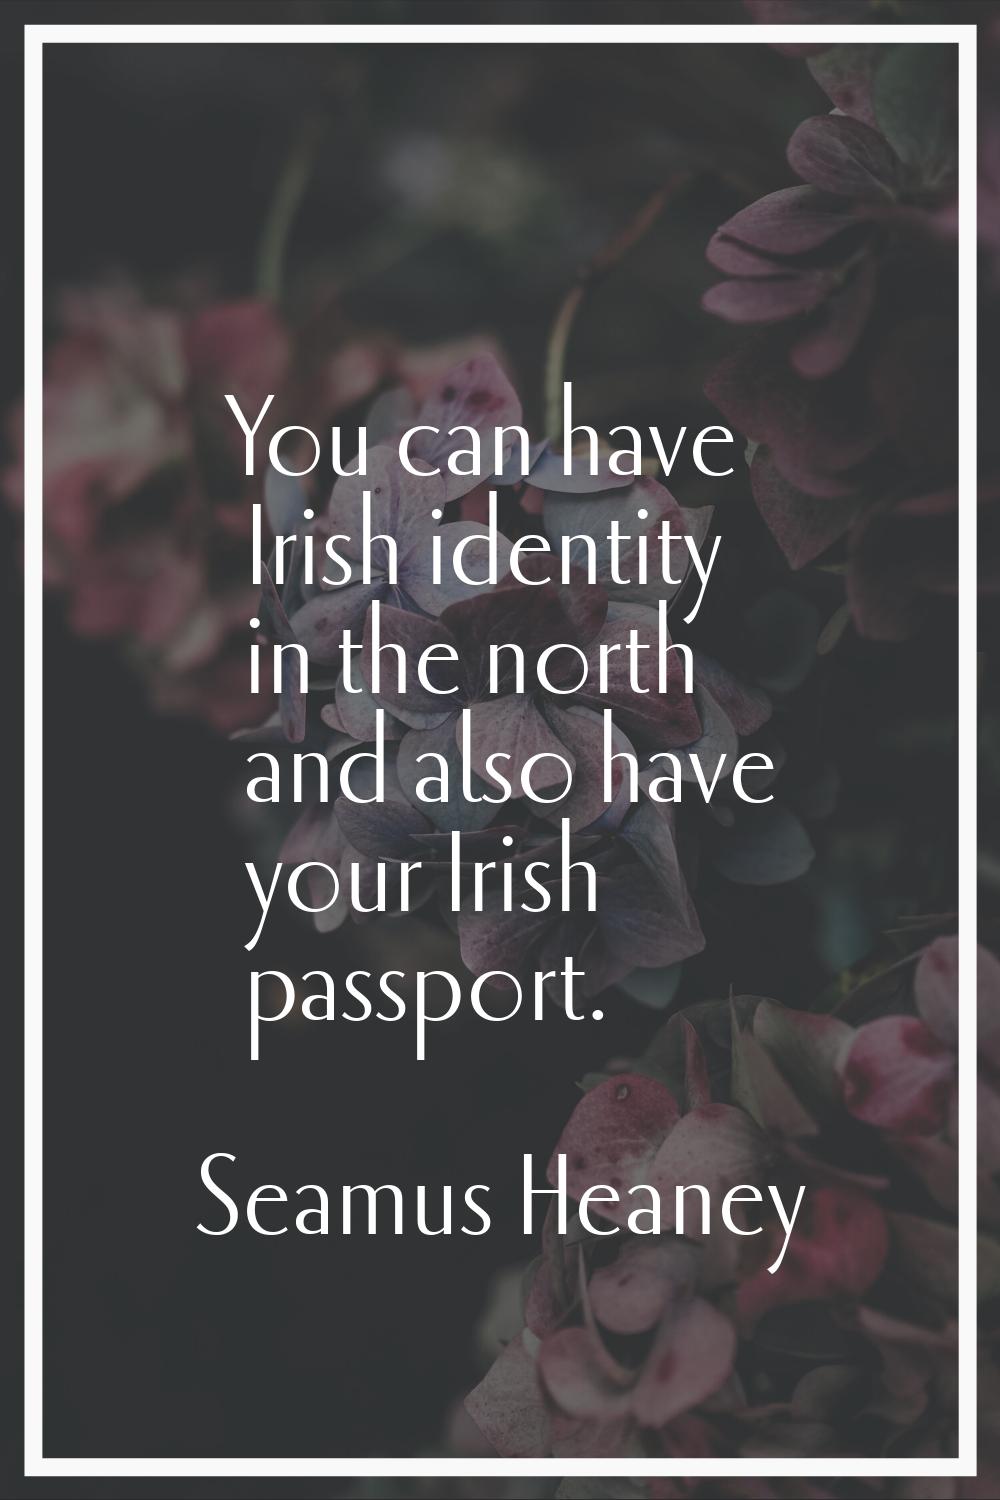 You can have Irish identity in the north and also have your Irish passport.